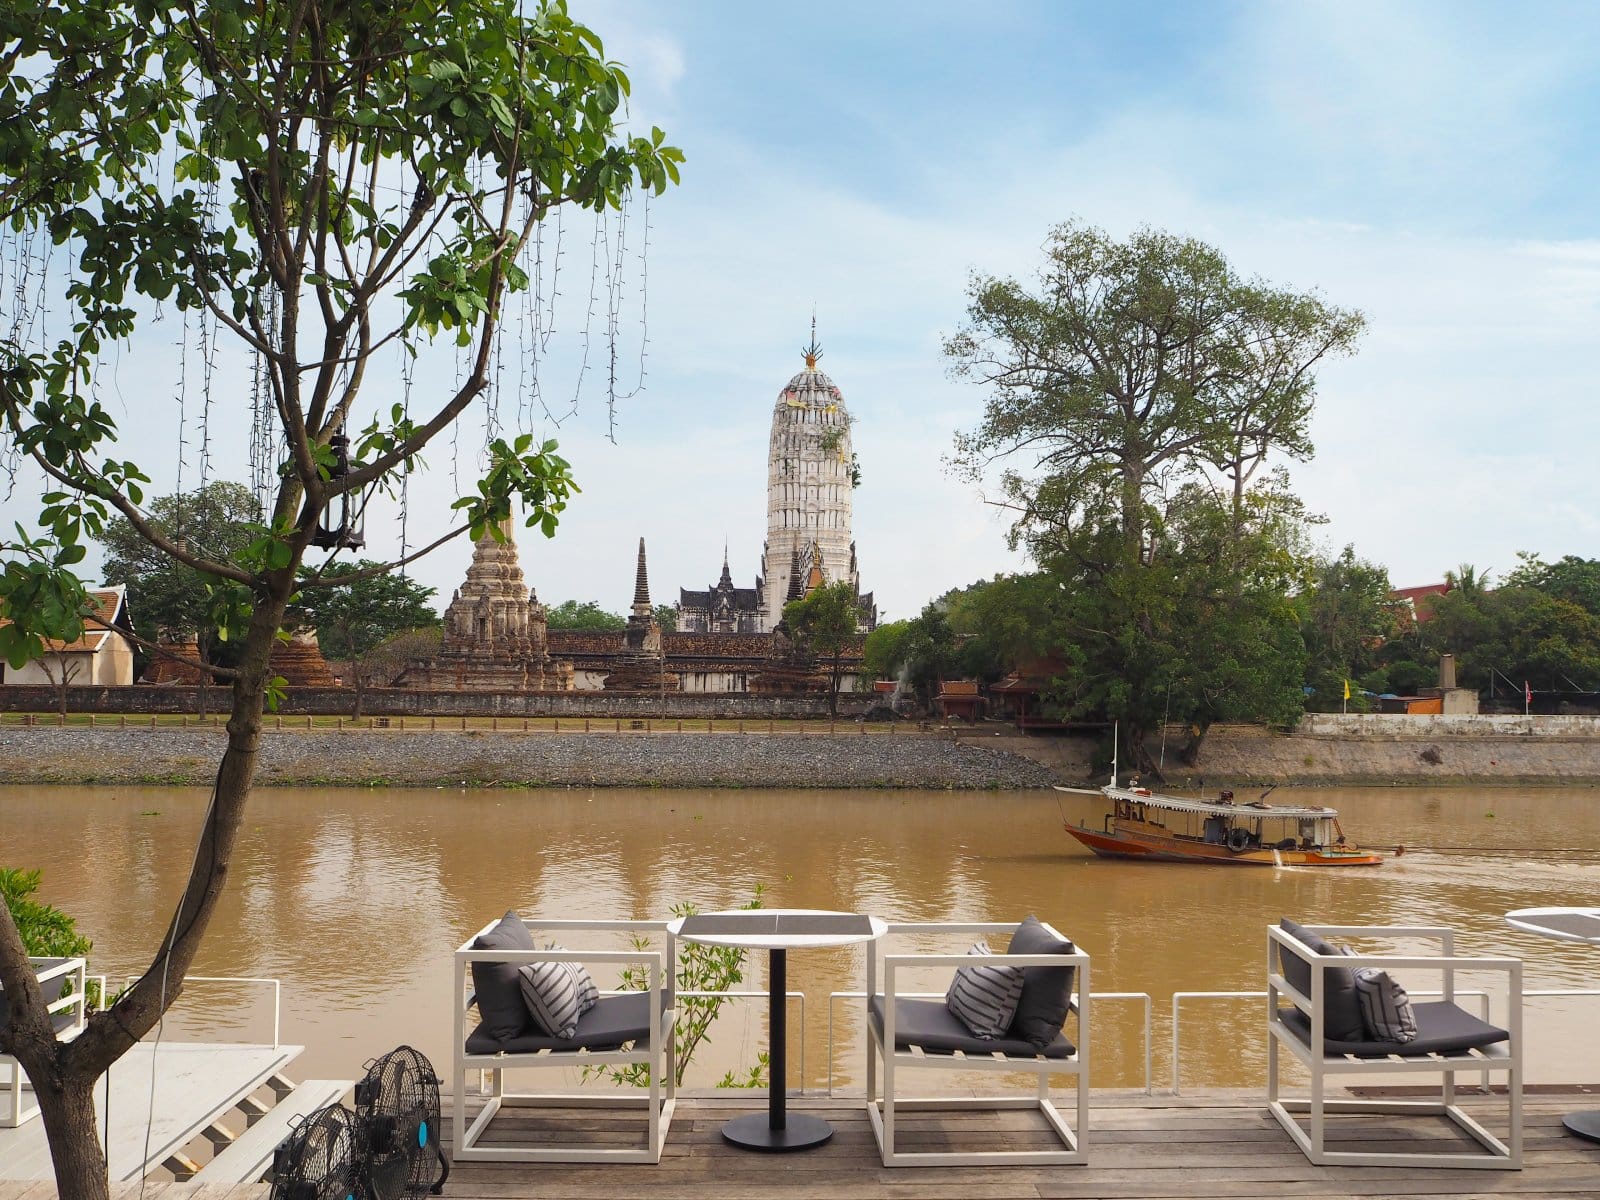 <p class="wp-caption-text">Image Credit: Shutterstock / Mongkolp</p>  <p><span>Lunch at Sala Ayutthaya Eatery and Bar provides a modern dining experience set against the historical backdrop of Wat Phutthaisawan. The restaurant specializes in Thai fusion cuisine, offering a contemporary take on traditional Thai flavors. The setting combines minimalist decor with views of the ancient temple, creating a contrast between the new and the old. The menu emphasizes using fresh, local ingredients, with river prawn dishes standing out as a highlight due to their freshness and quality.</span></p>